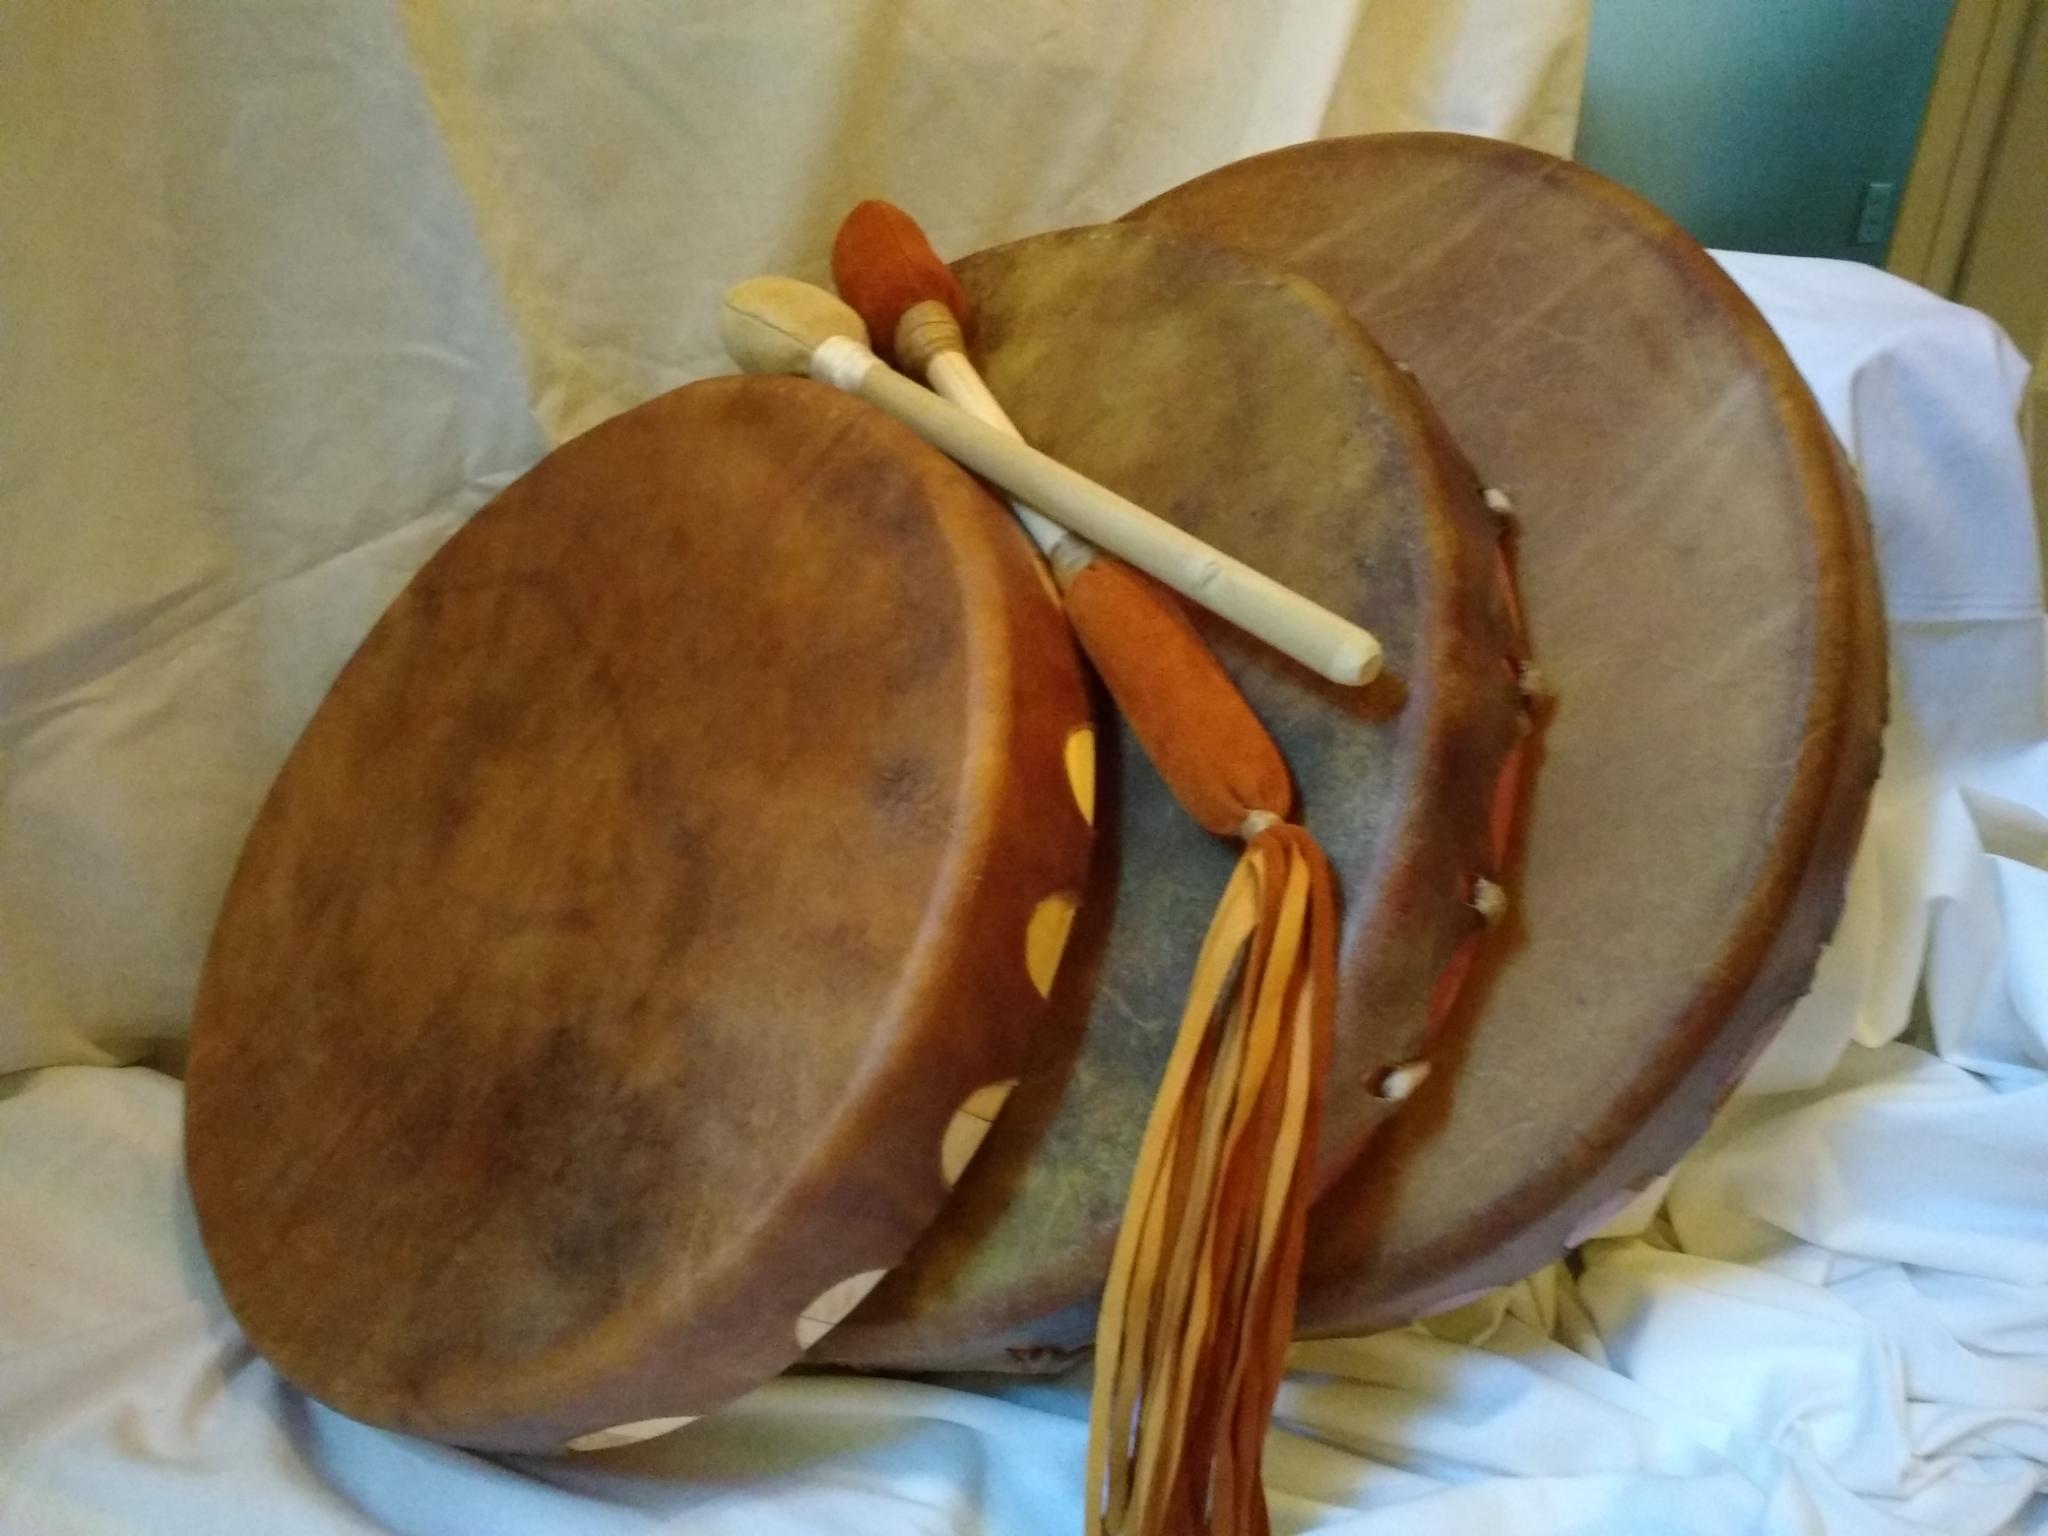 Native American Hand Drums from The Drum People